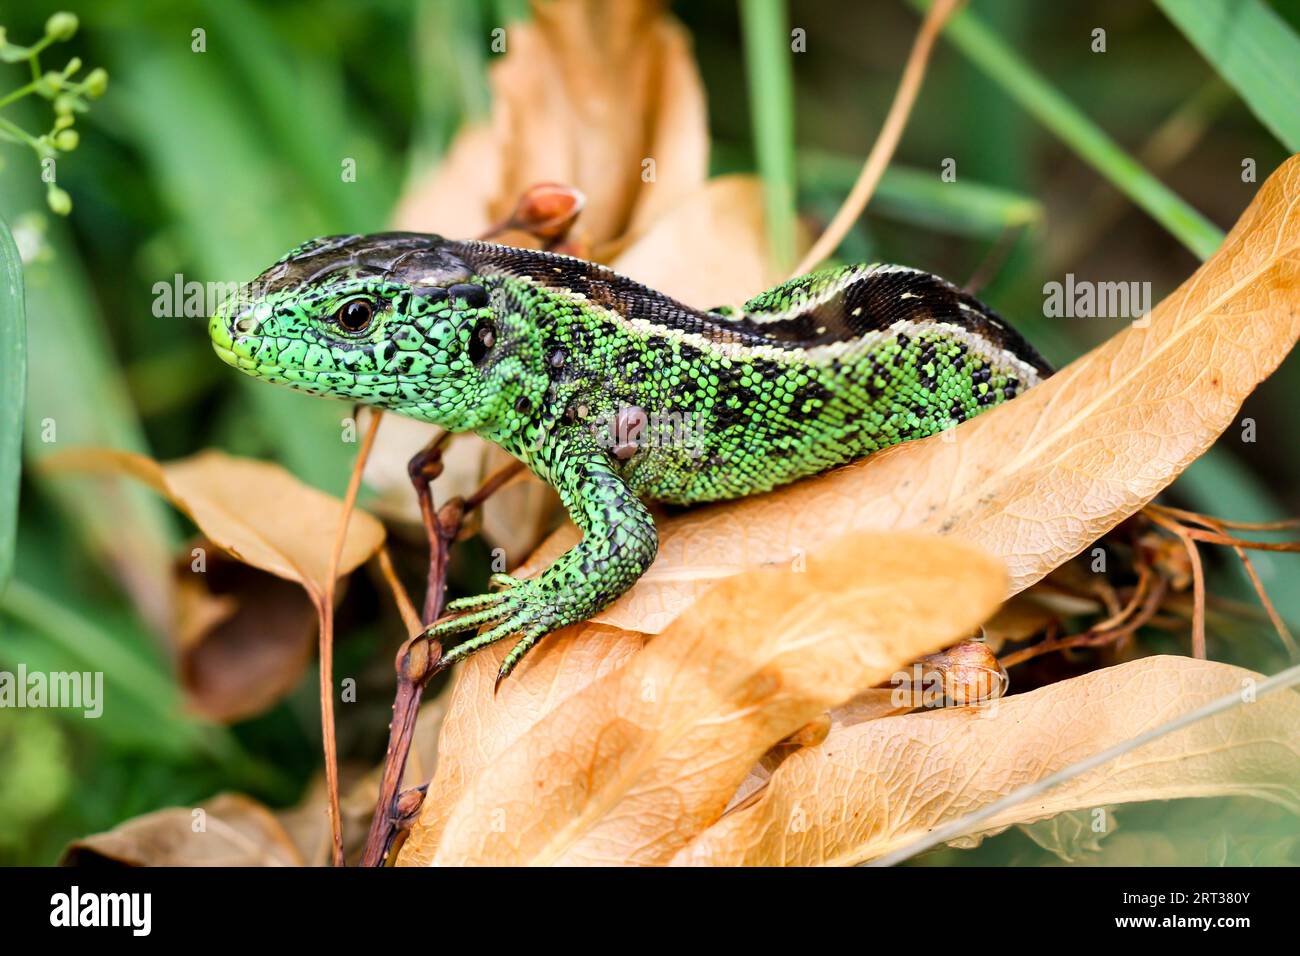 A male sand lizard in the grass Stock Photo